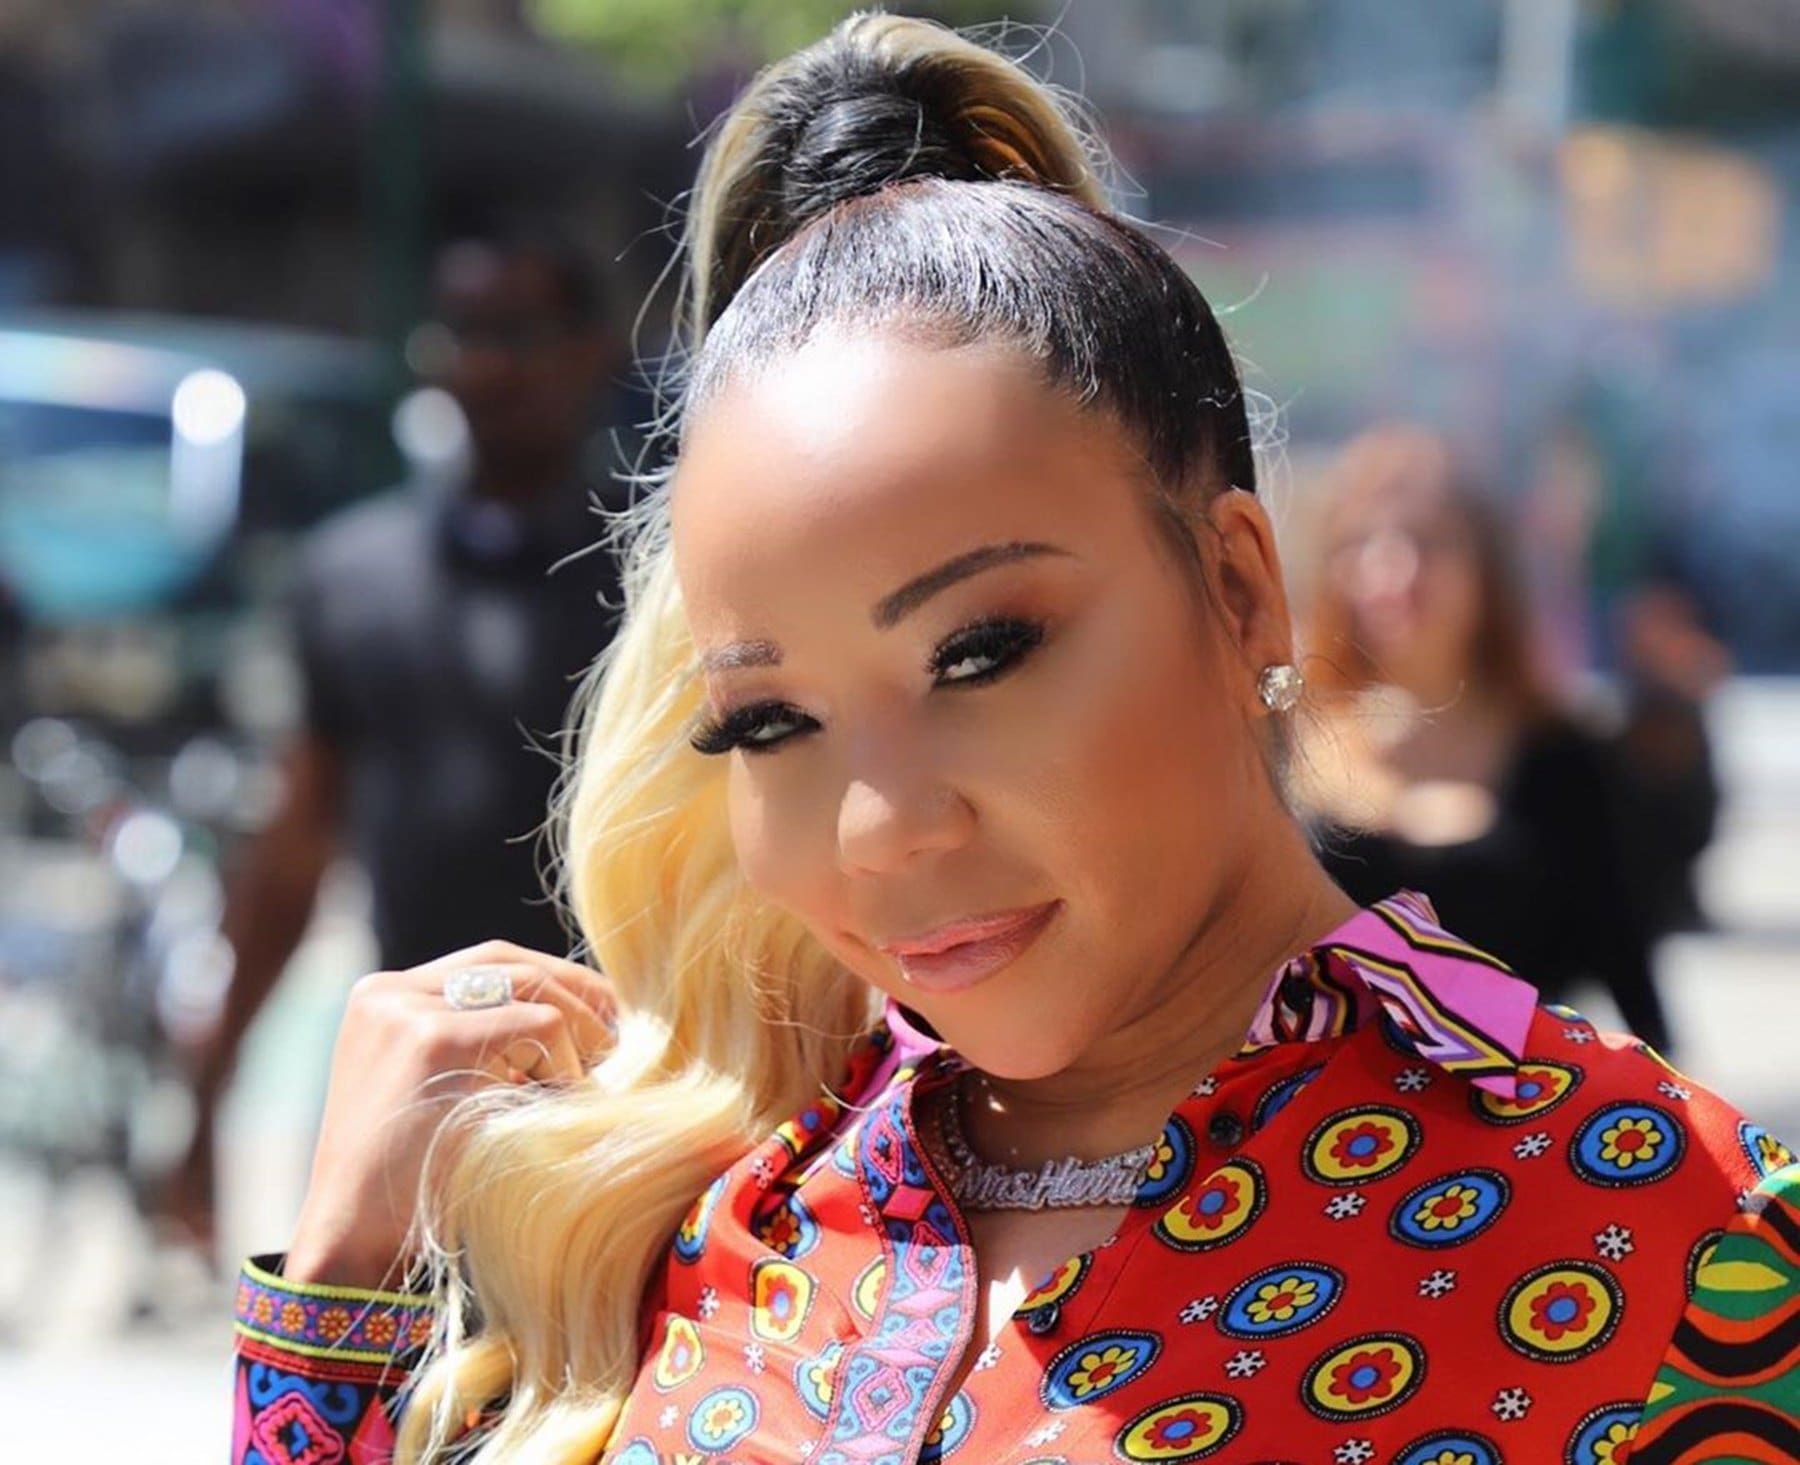 Tiny Harris Shares New Pics From Her Latest Solo Performance - She Shows Off Her DJ And The Whole Crew